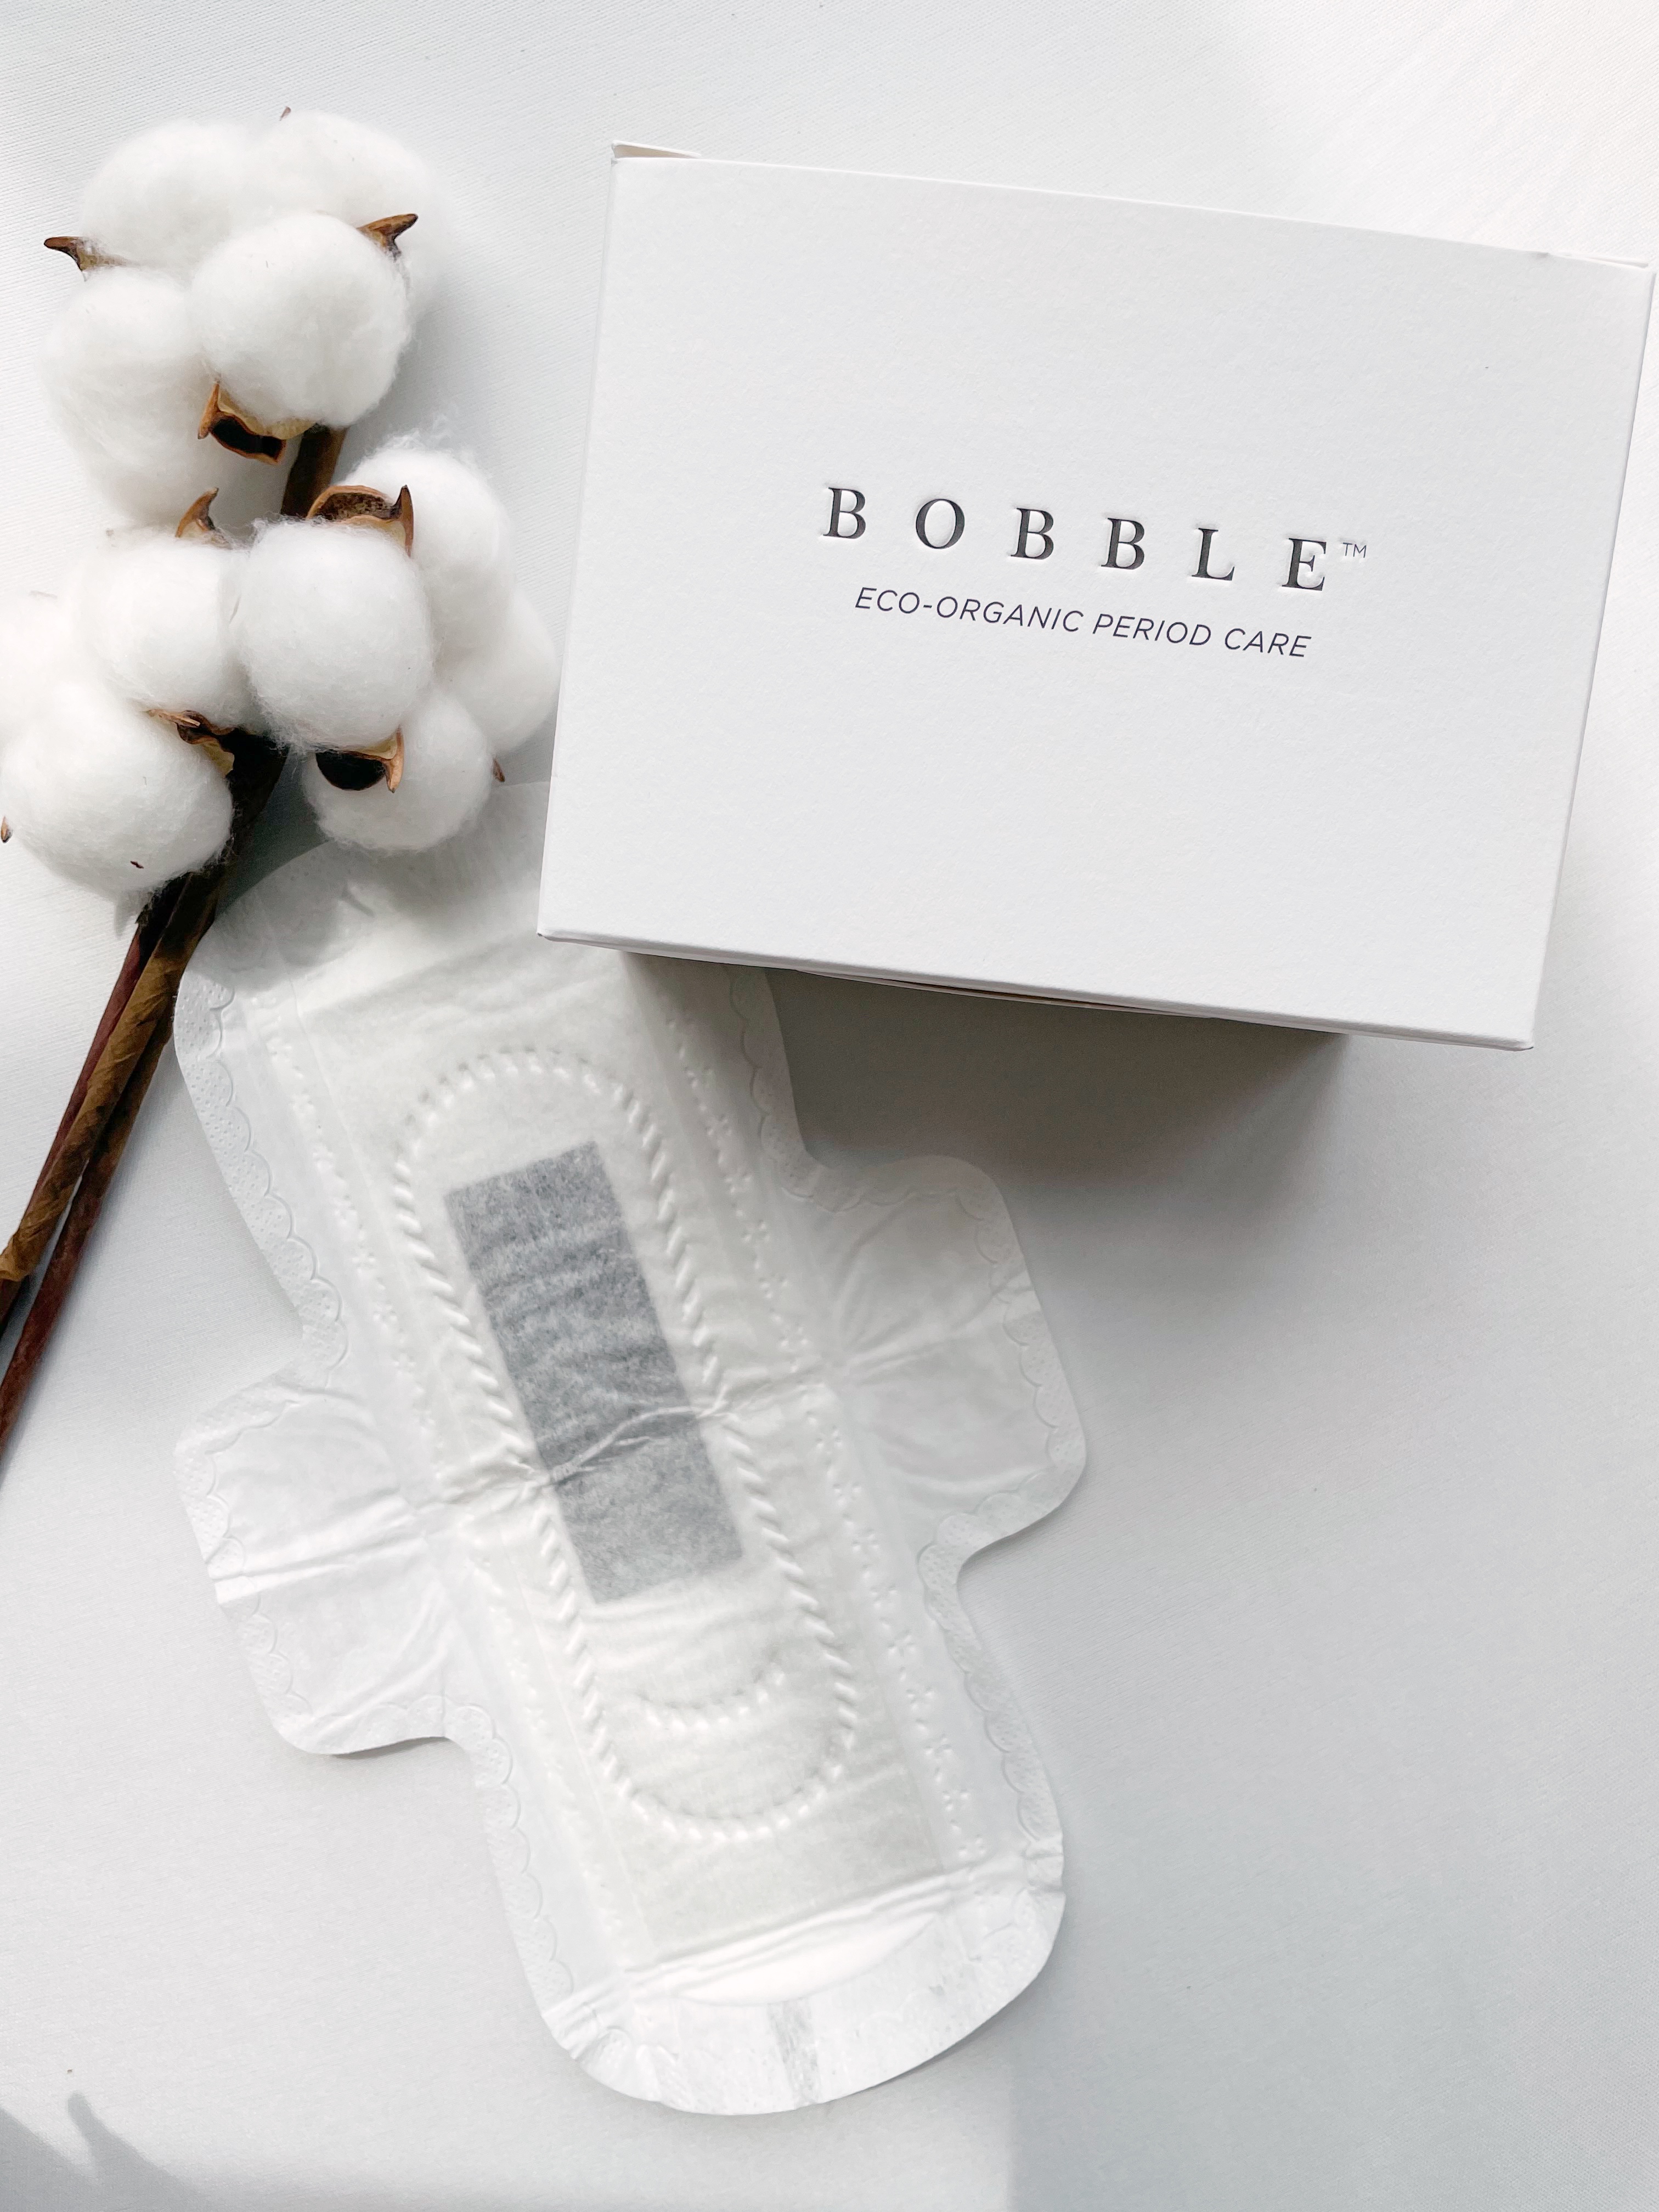 Malisse Tan of Bobble on what *actually* goes into your period products (фото 4)